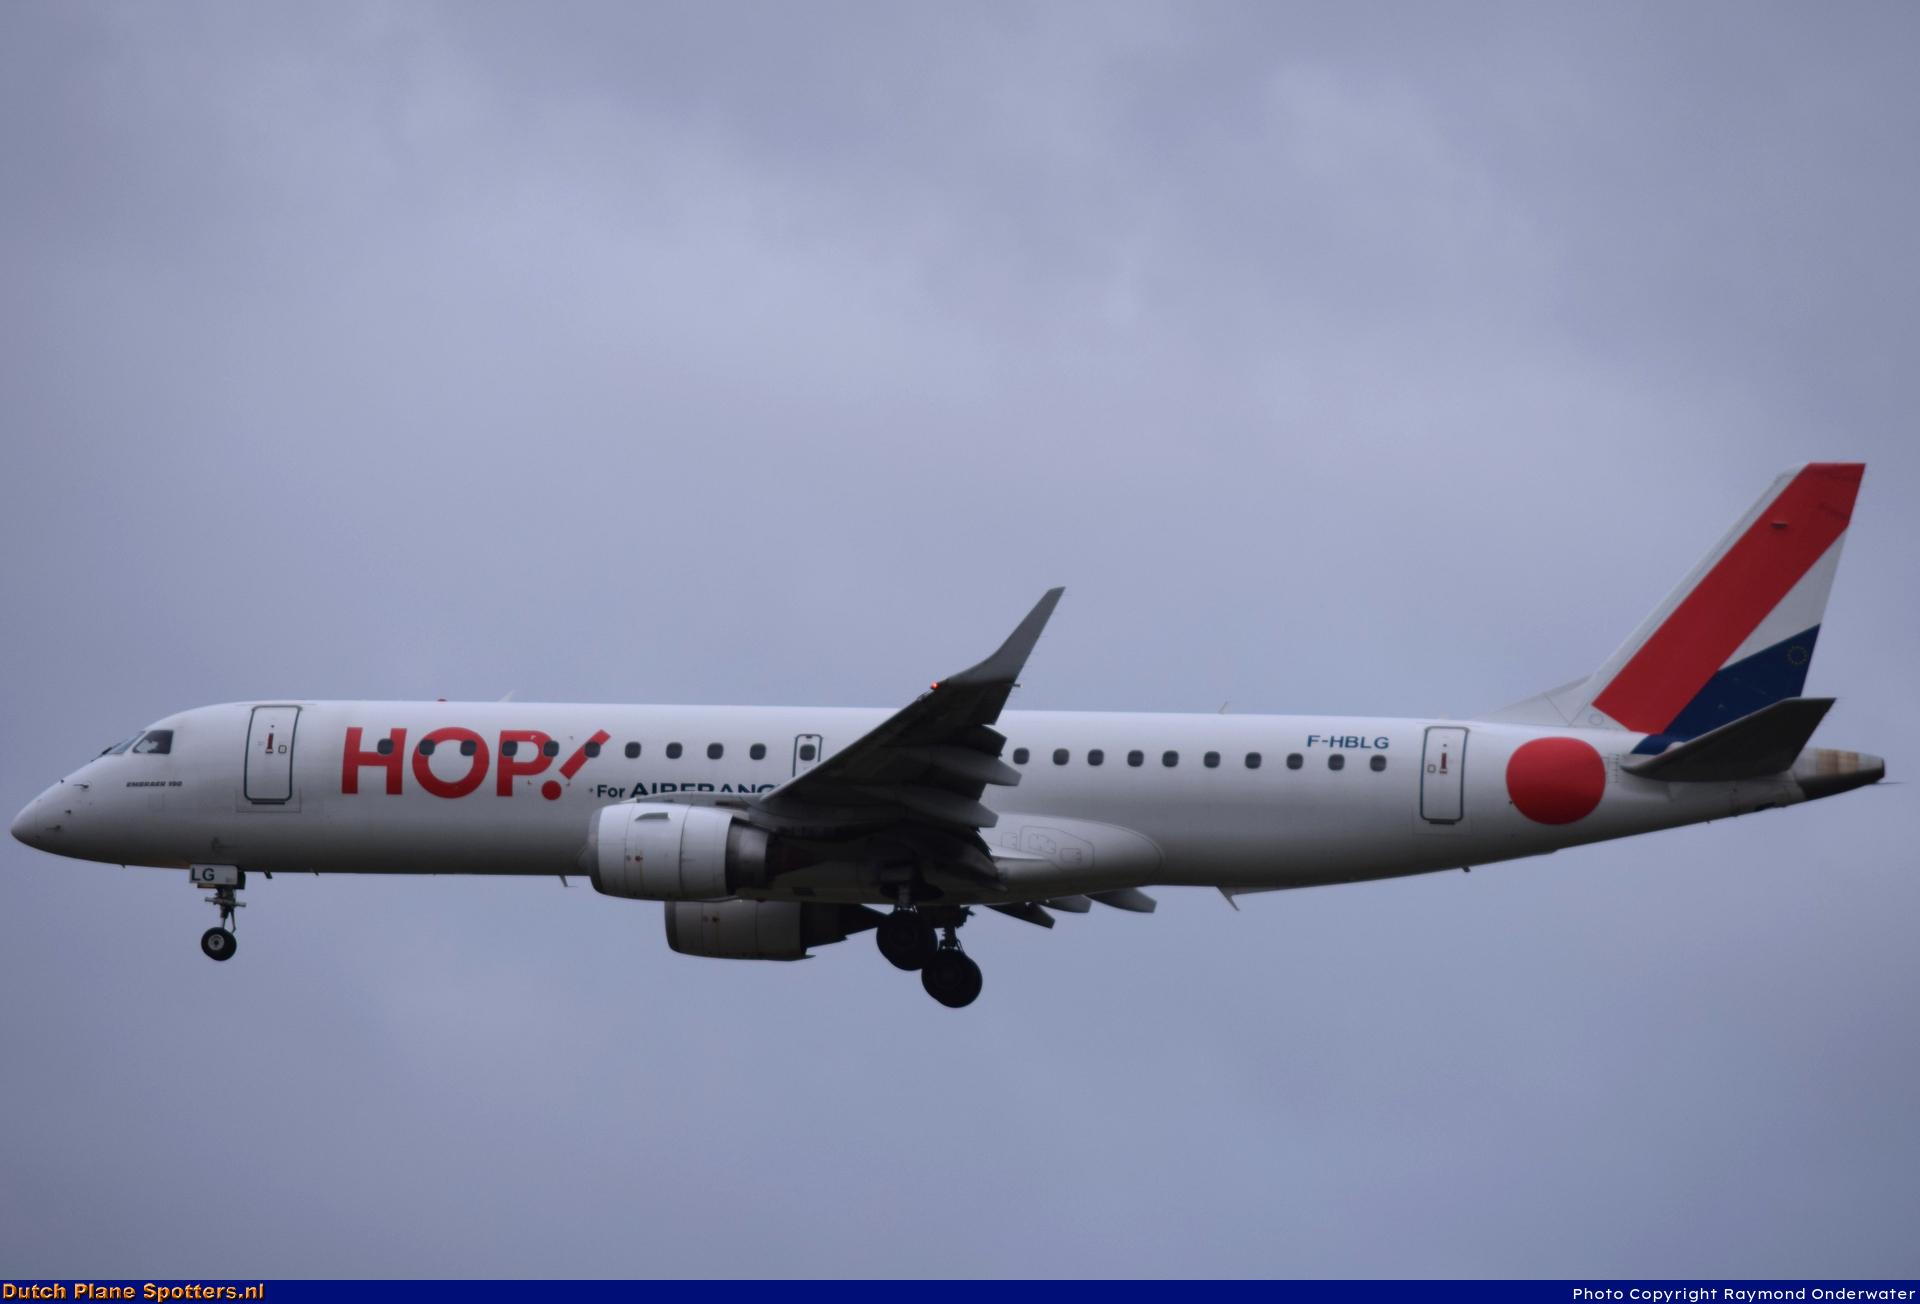 F-HBLG Embraer 190 Hop (Air France) by Raymond Onderwater